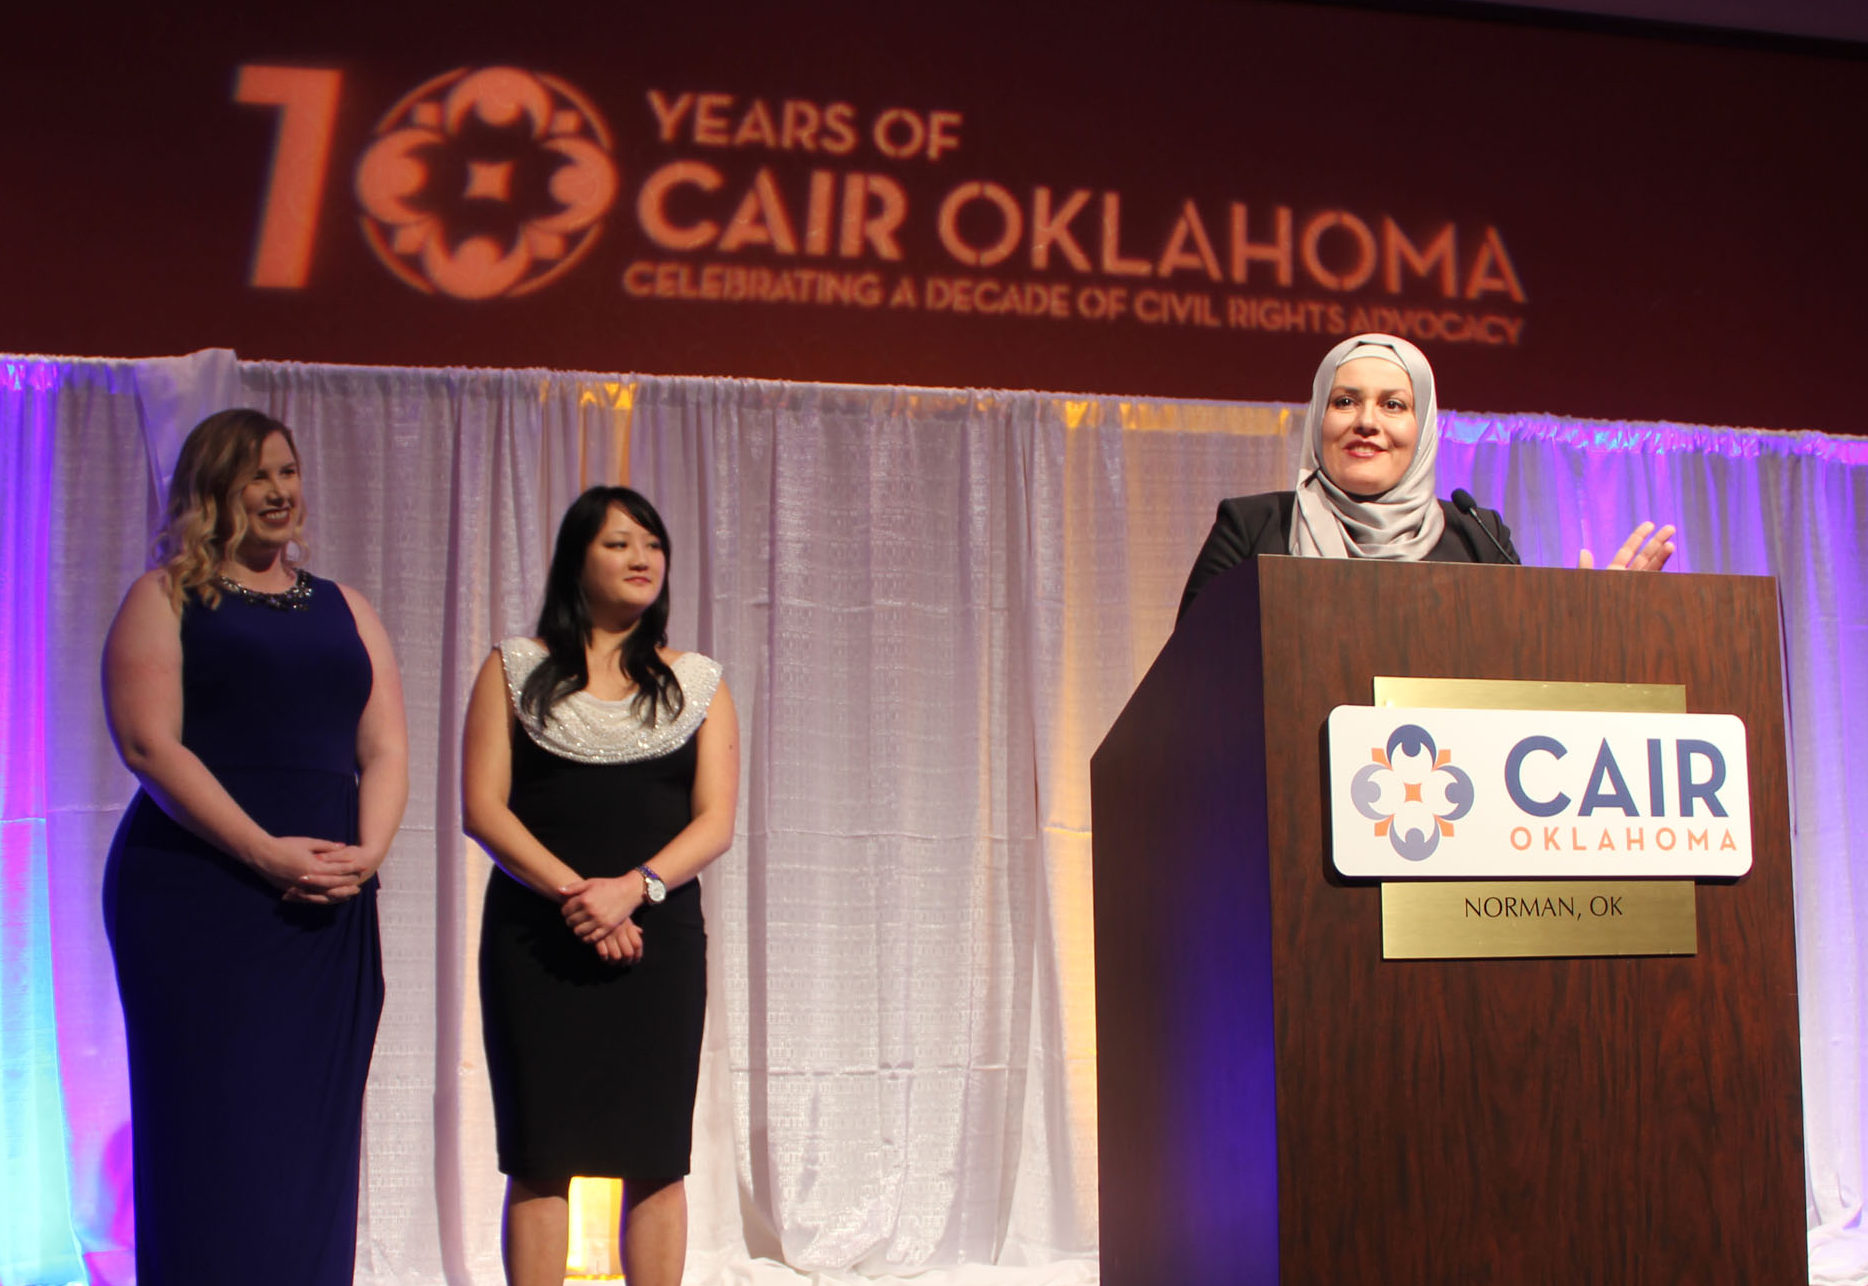 CAIR-OK to Present ‘Oklahoma Muslim of the Year’ Award at 12th Annual Banquet